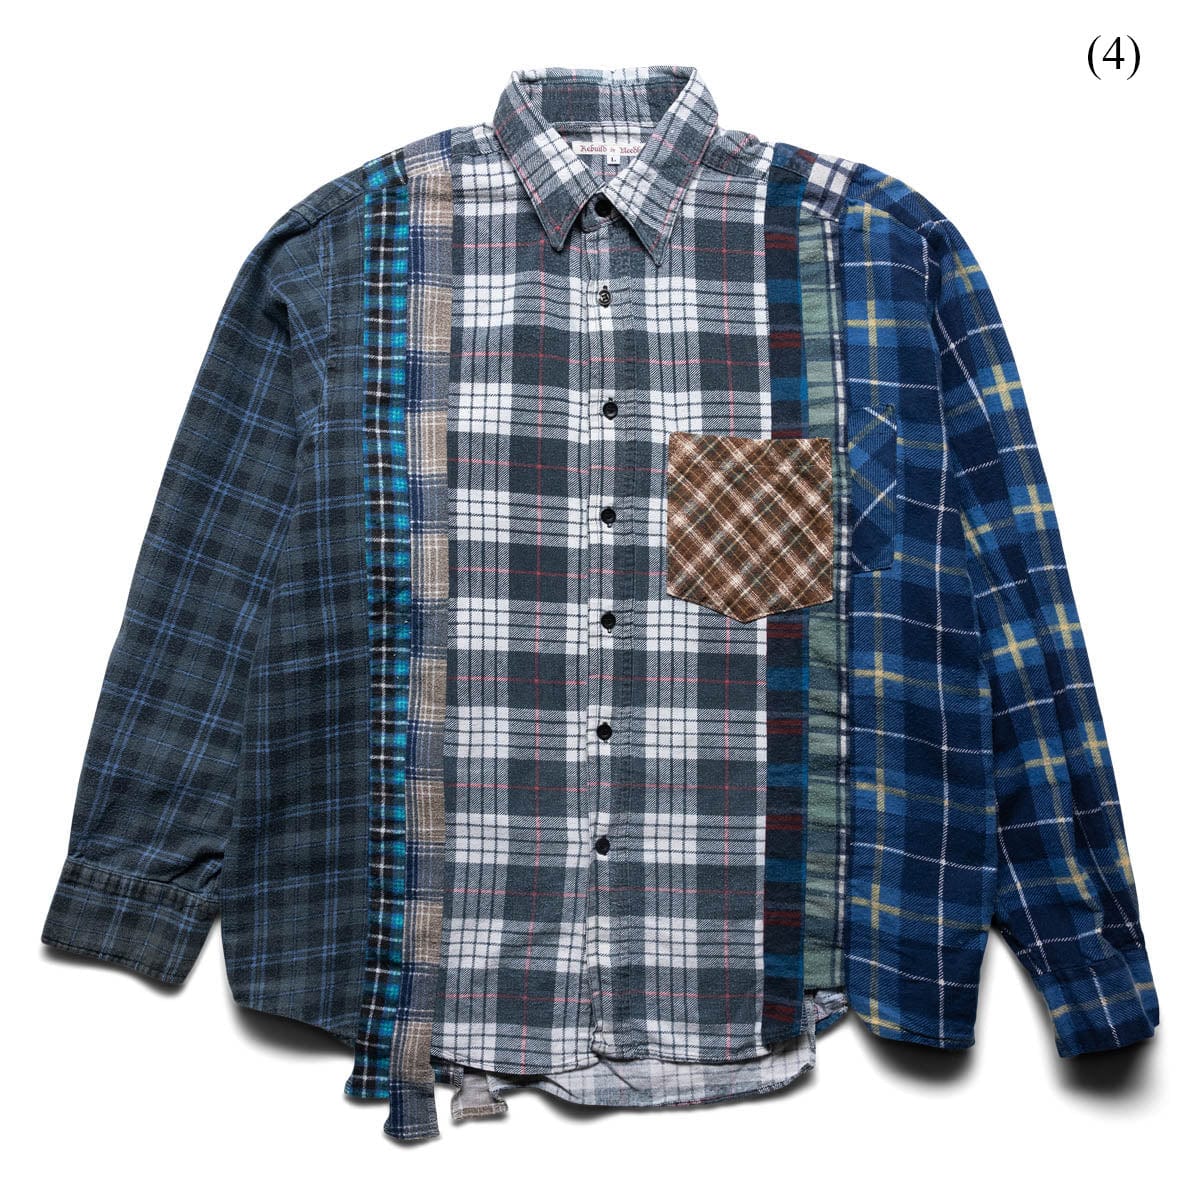 Needles Shirts ASSORTED / L (4) FLANNEL SHIRT - 7 CUTS SHIRT (LARGE/MULTIPLE STYLES)